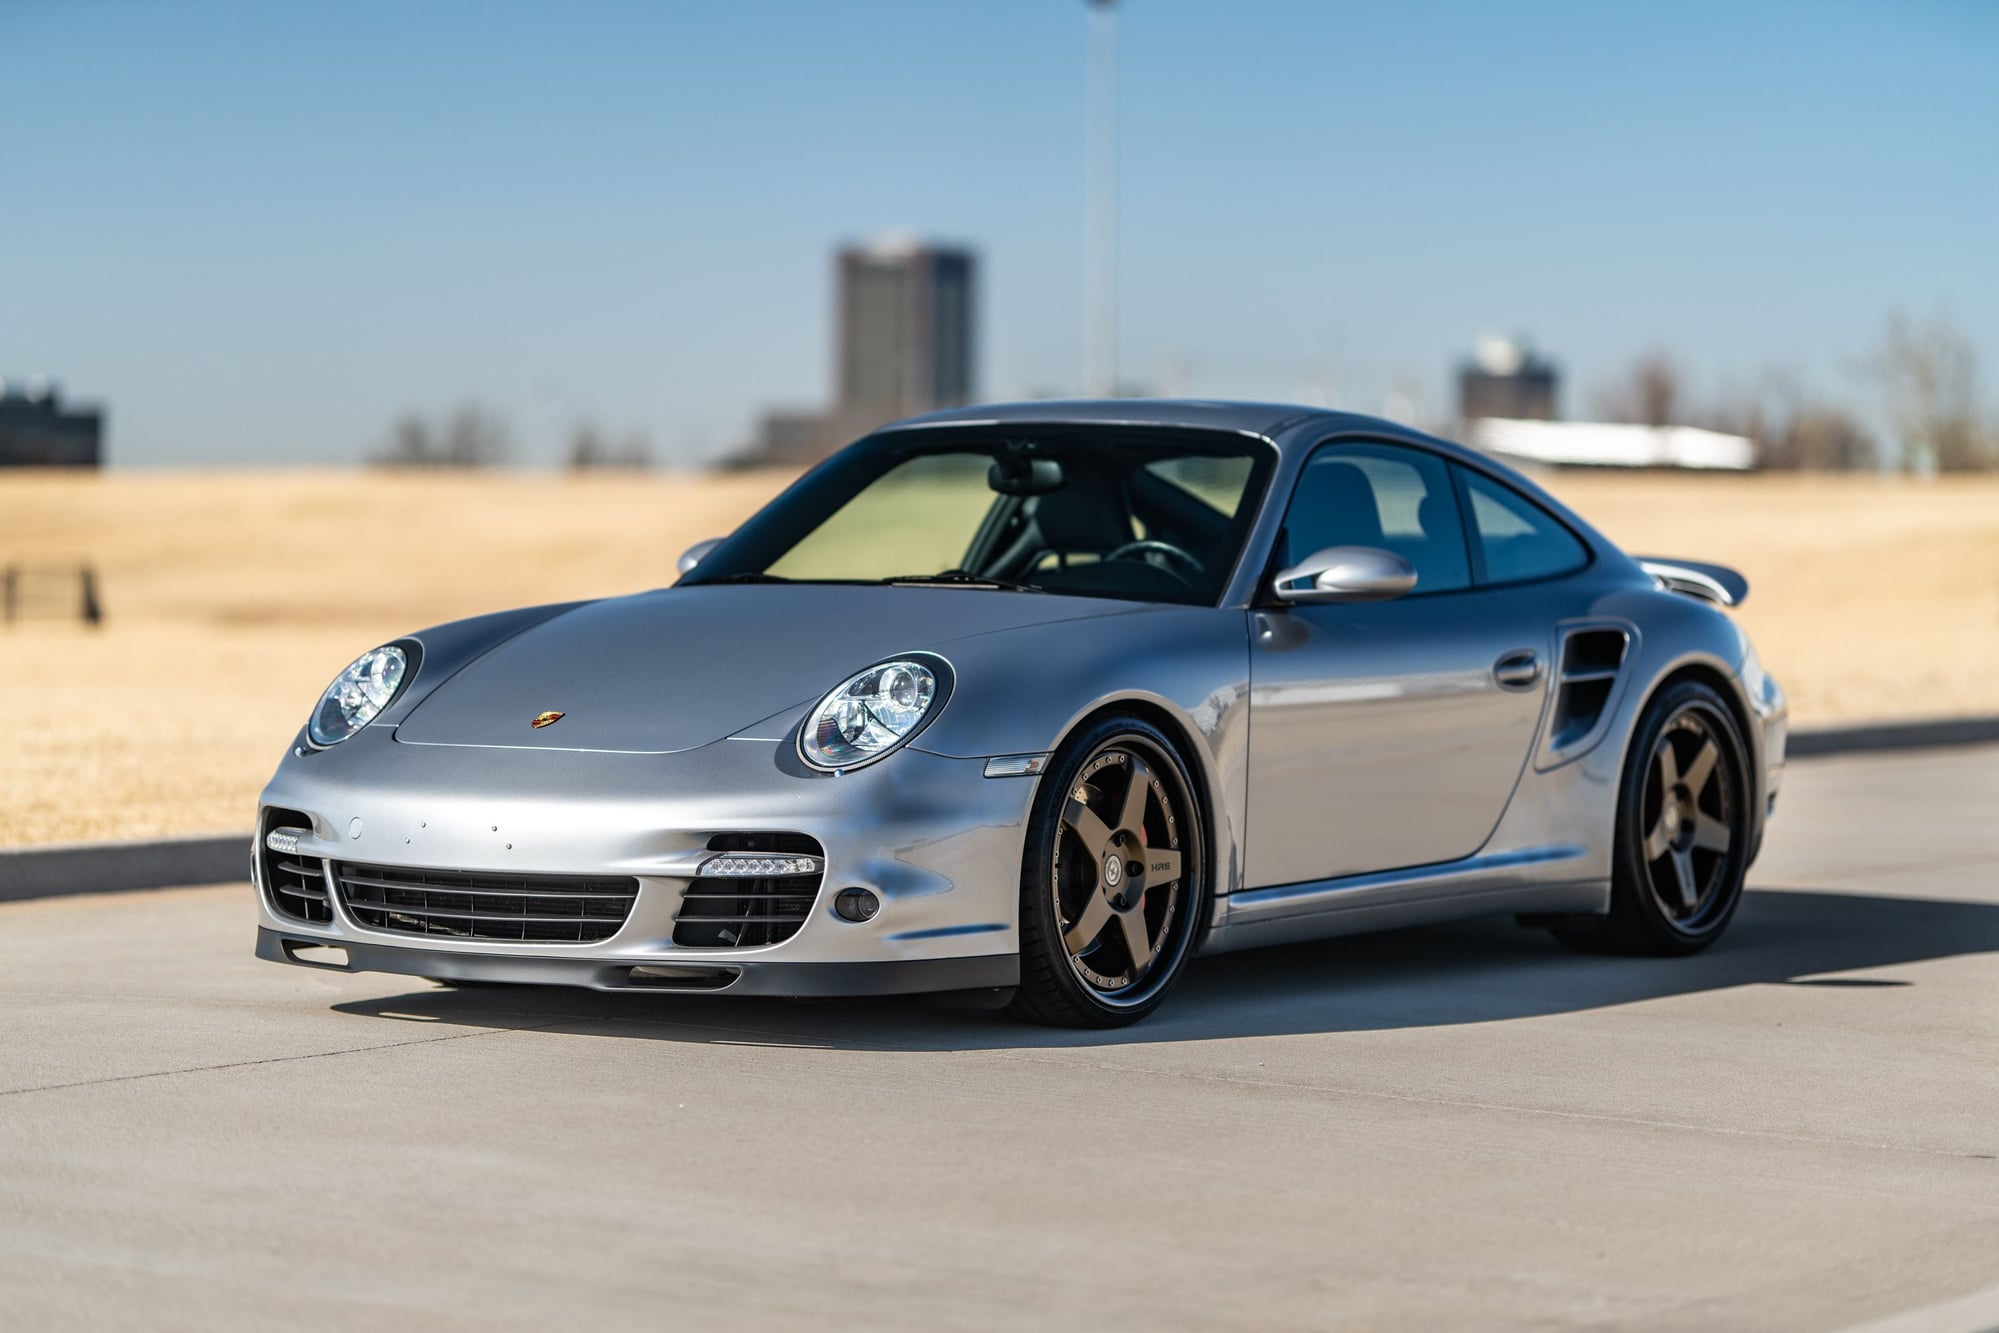 2008 Porsche 911 - 2008 911 Turbo 6 speed tastefully modified - Used - VIN WP0AD299X8S783477 - 48,500 Miles - 6 cyl - AWD - Manual - Coupe - Silver - Oklahoma City, OK 73118, United States